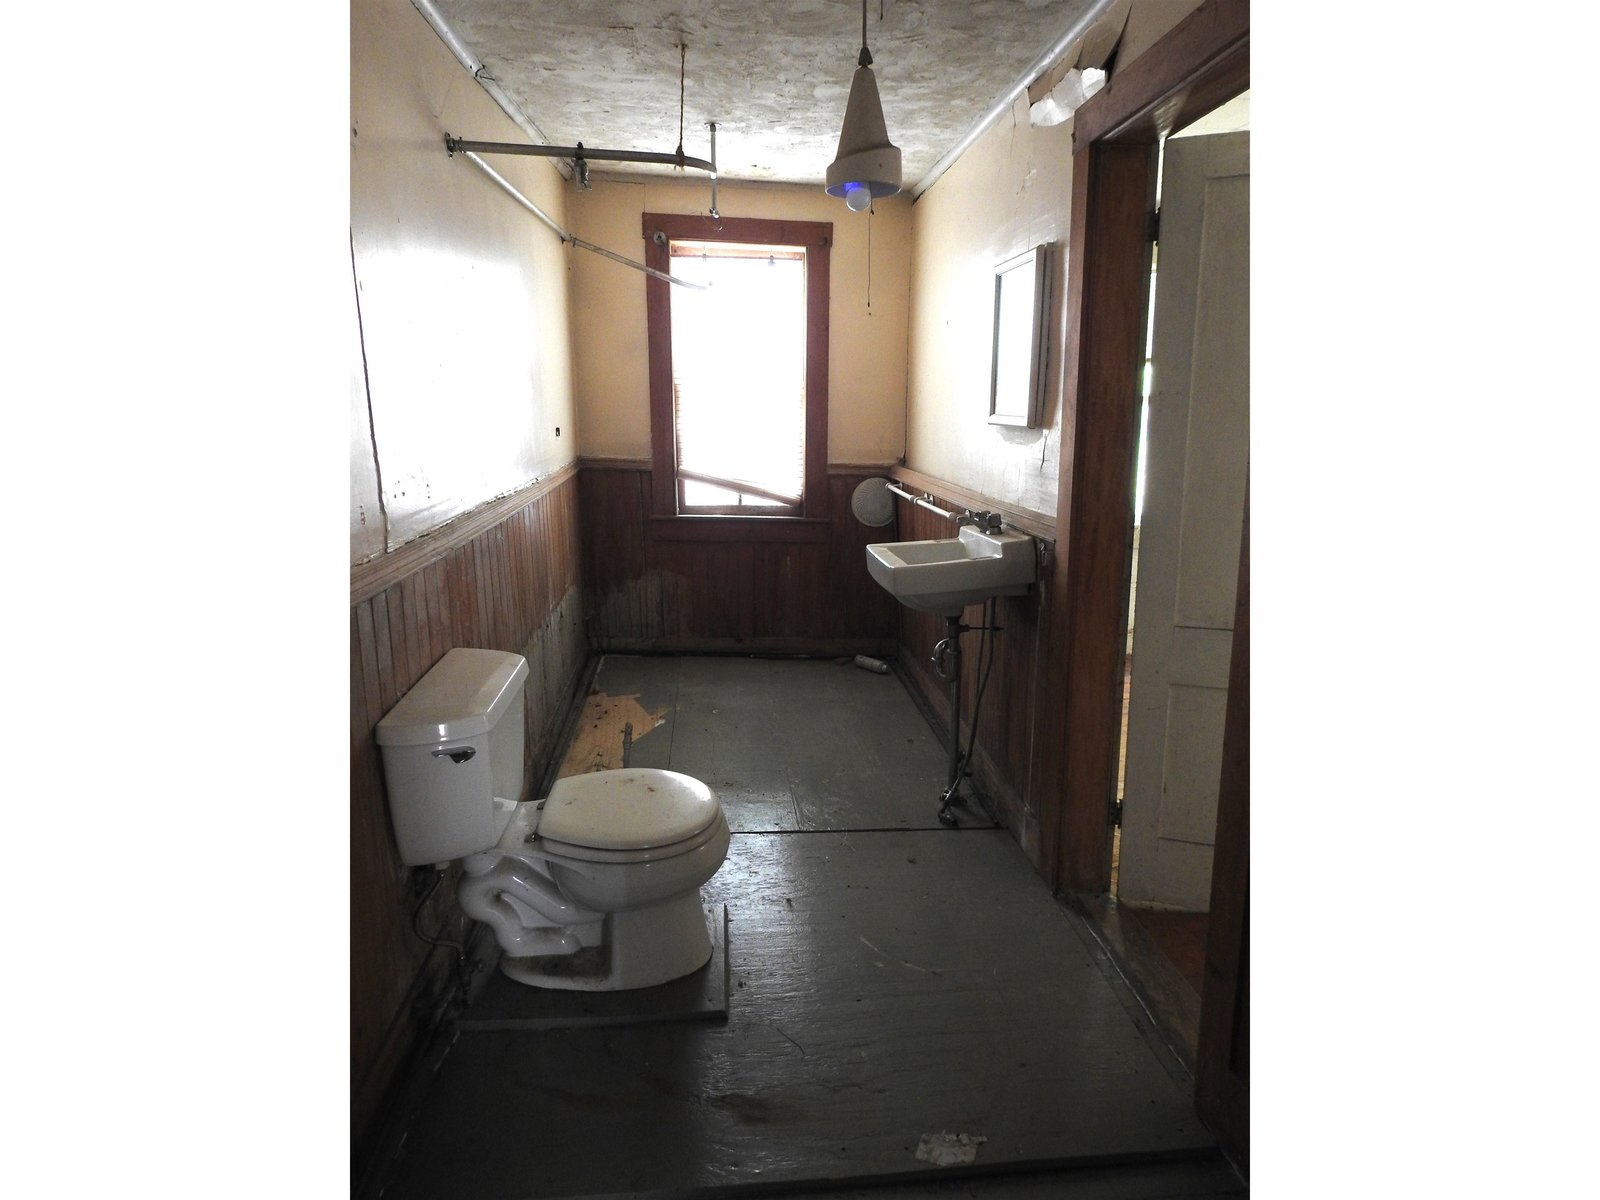 Bathroom with door to right accessing primary bedroom